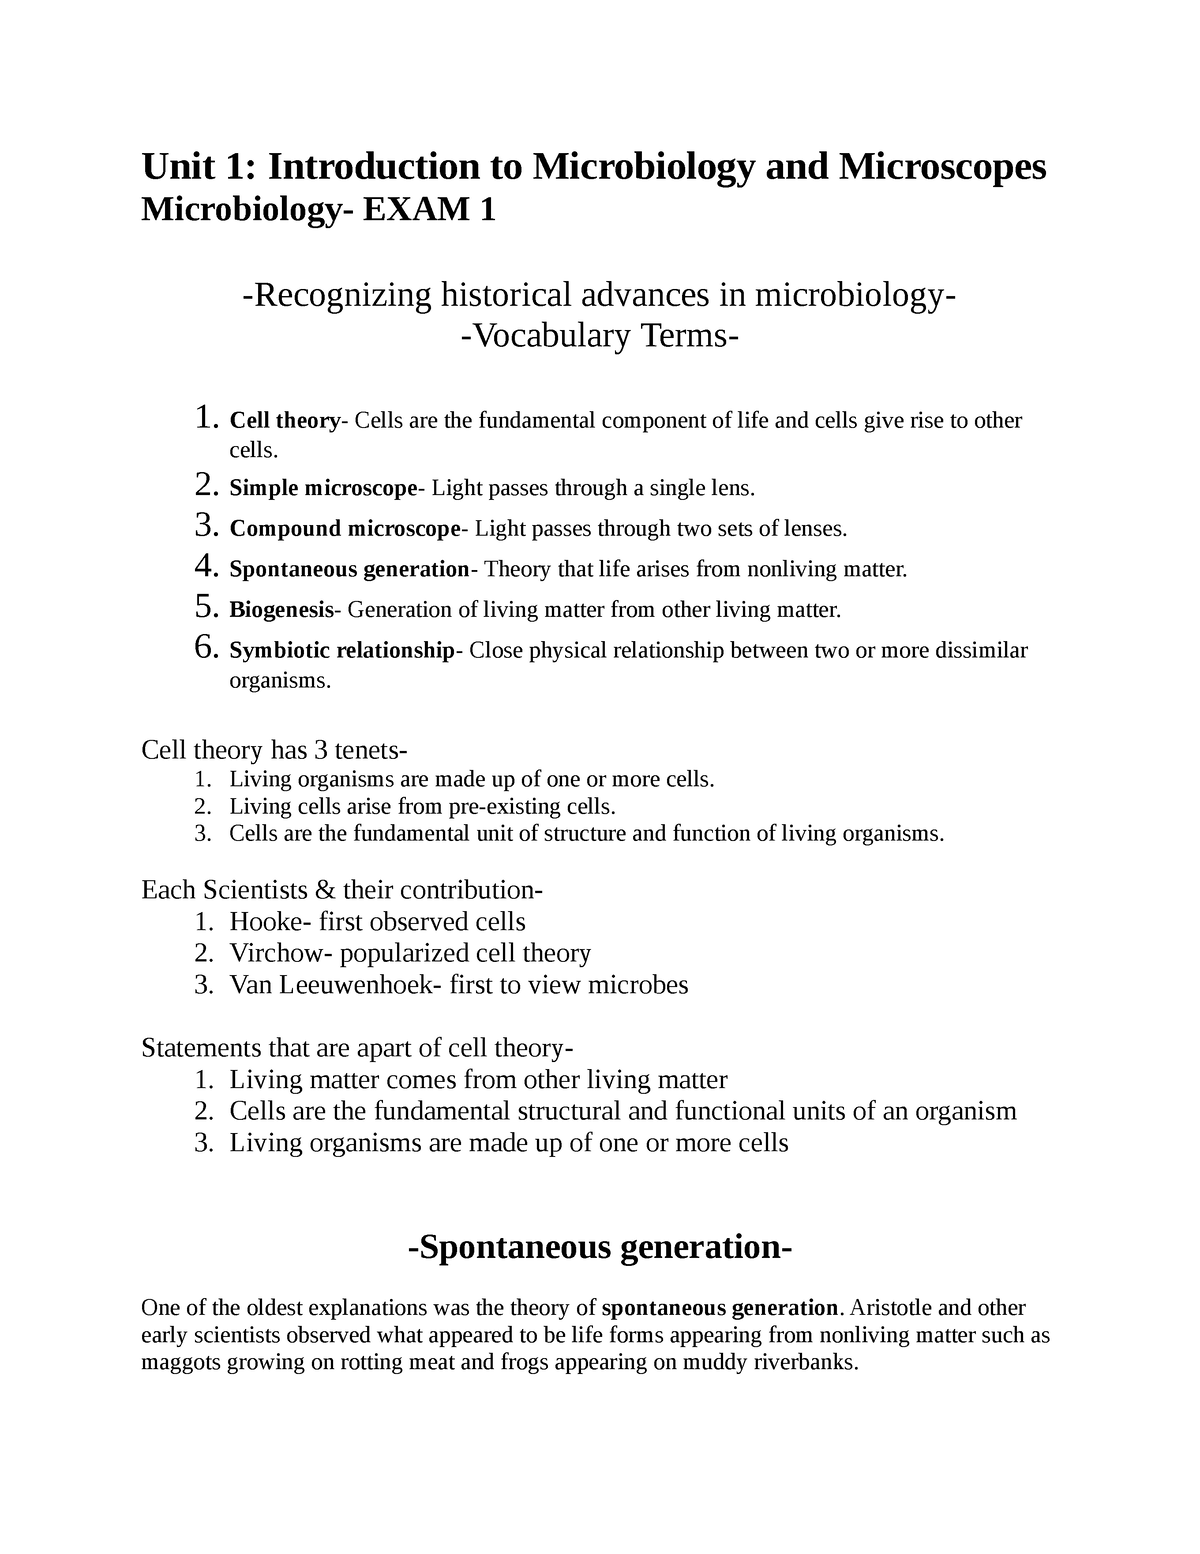 week 1 assignment microbiology basics tissues and membranes